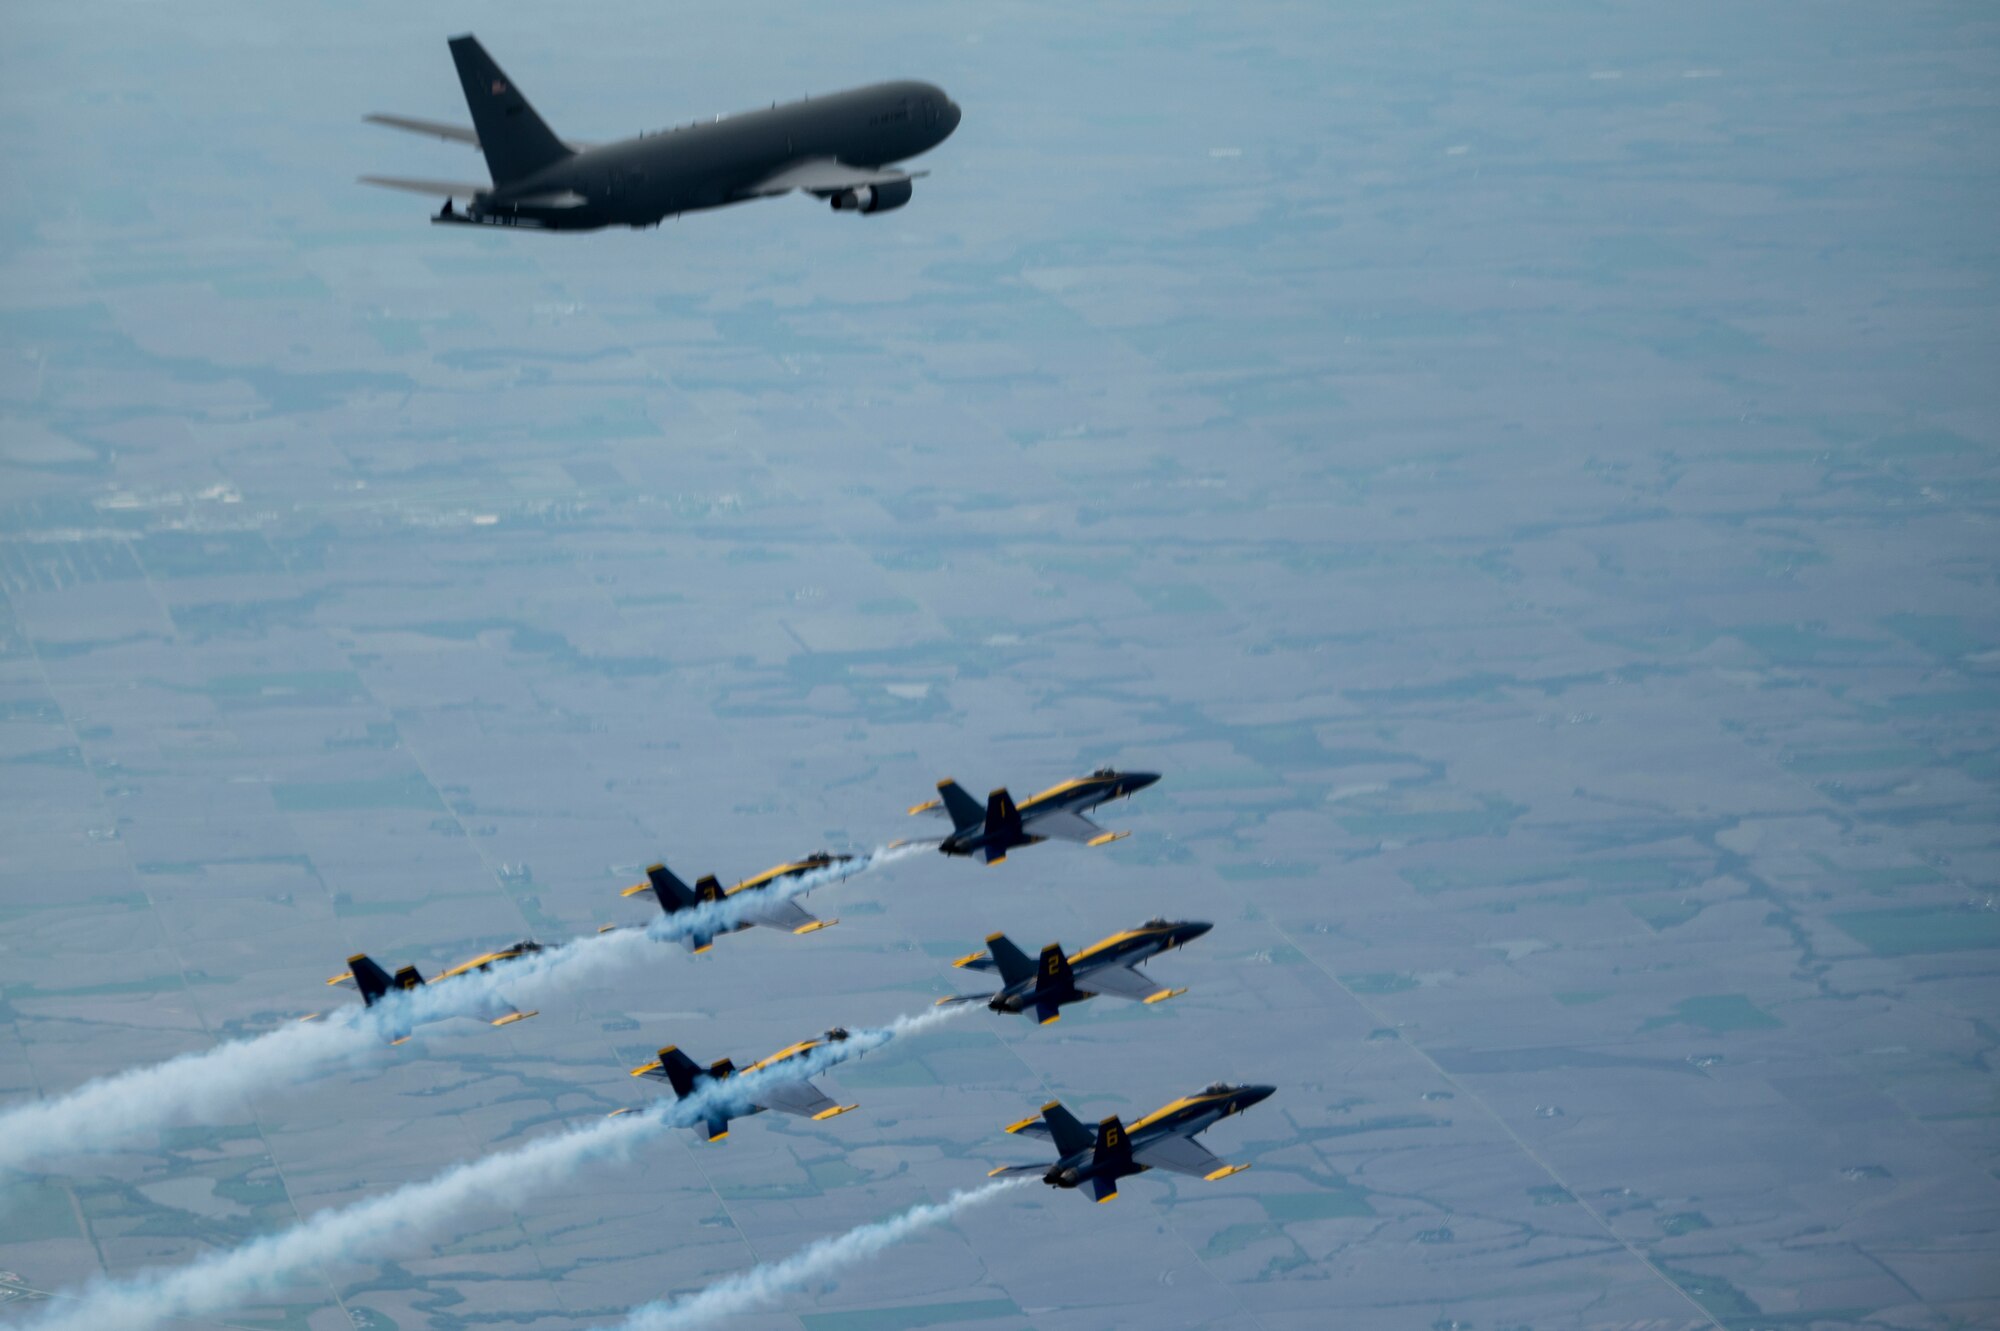 The U.S. Navy Blue Angels fly in formation alongside a KC-46A Pegasus assigned to 916th Air Refueling Wing, after being aerial refueled in the skies over Nebraska, May 11, 2022. The KC-46A helped sustain the Blue Angels by refueling during their flight from Florida to Ellsworth Air Force Base, South Dakota. (U.S. Air Force photo by Senior Airman Kevin Holloway)